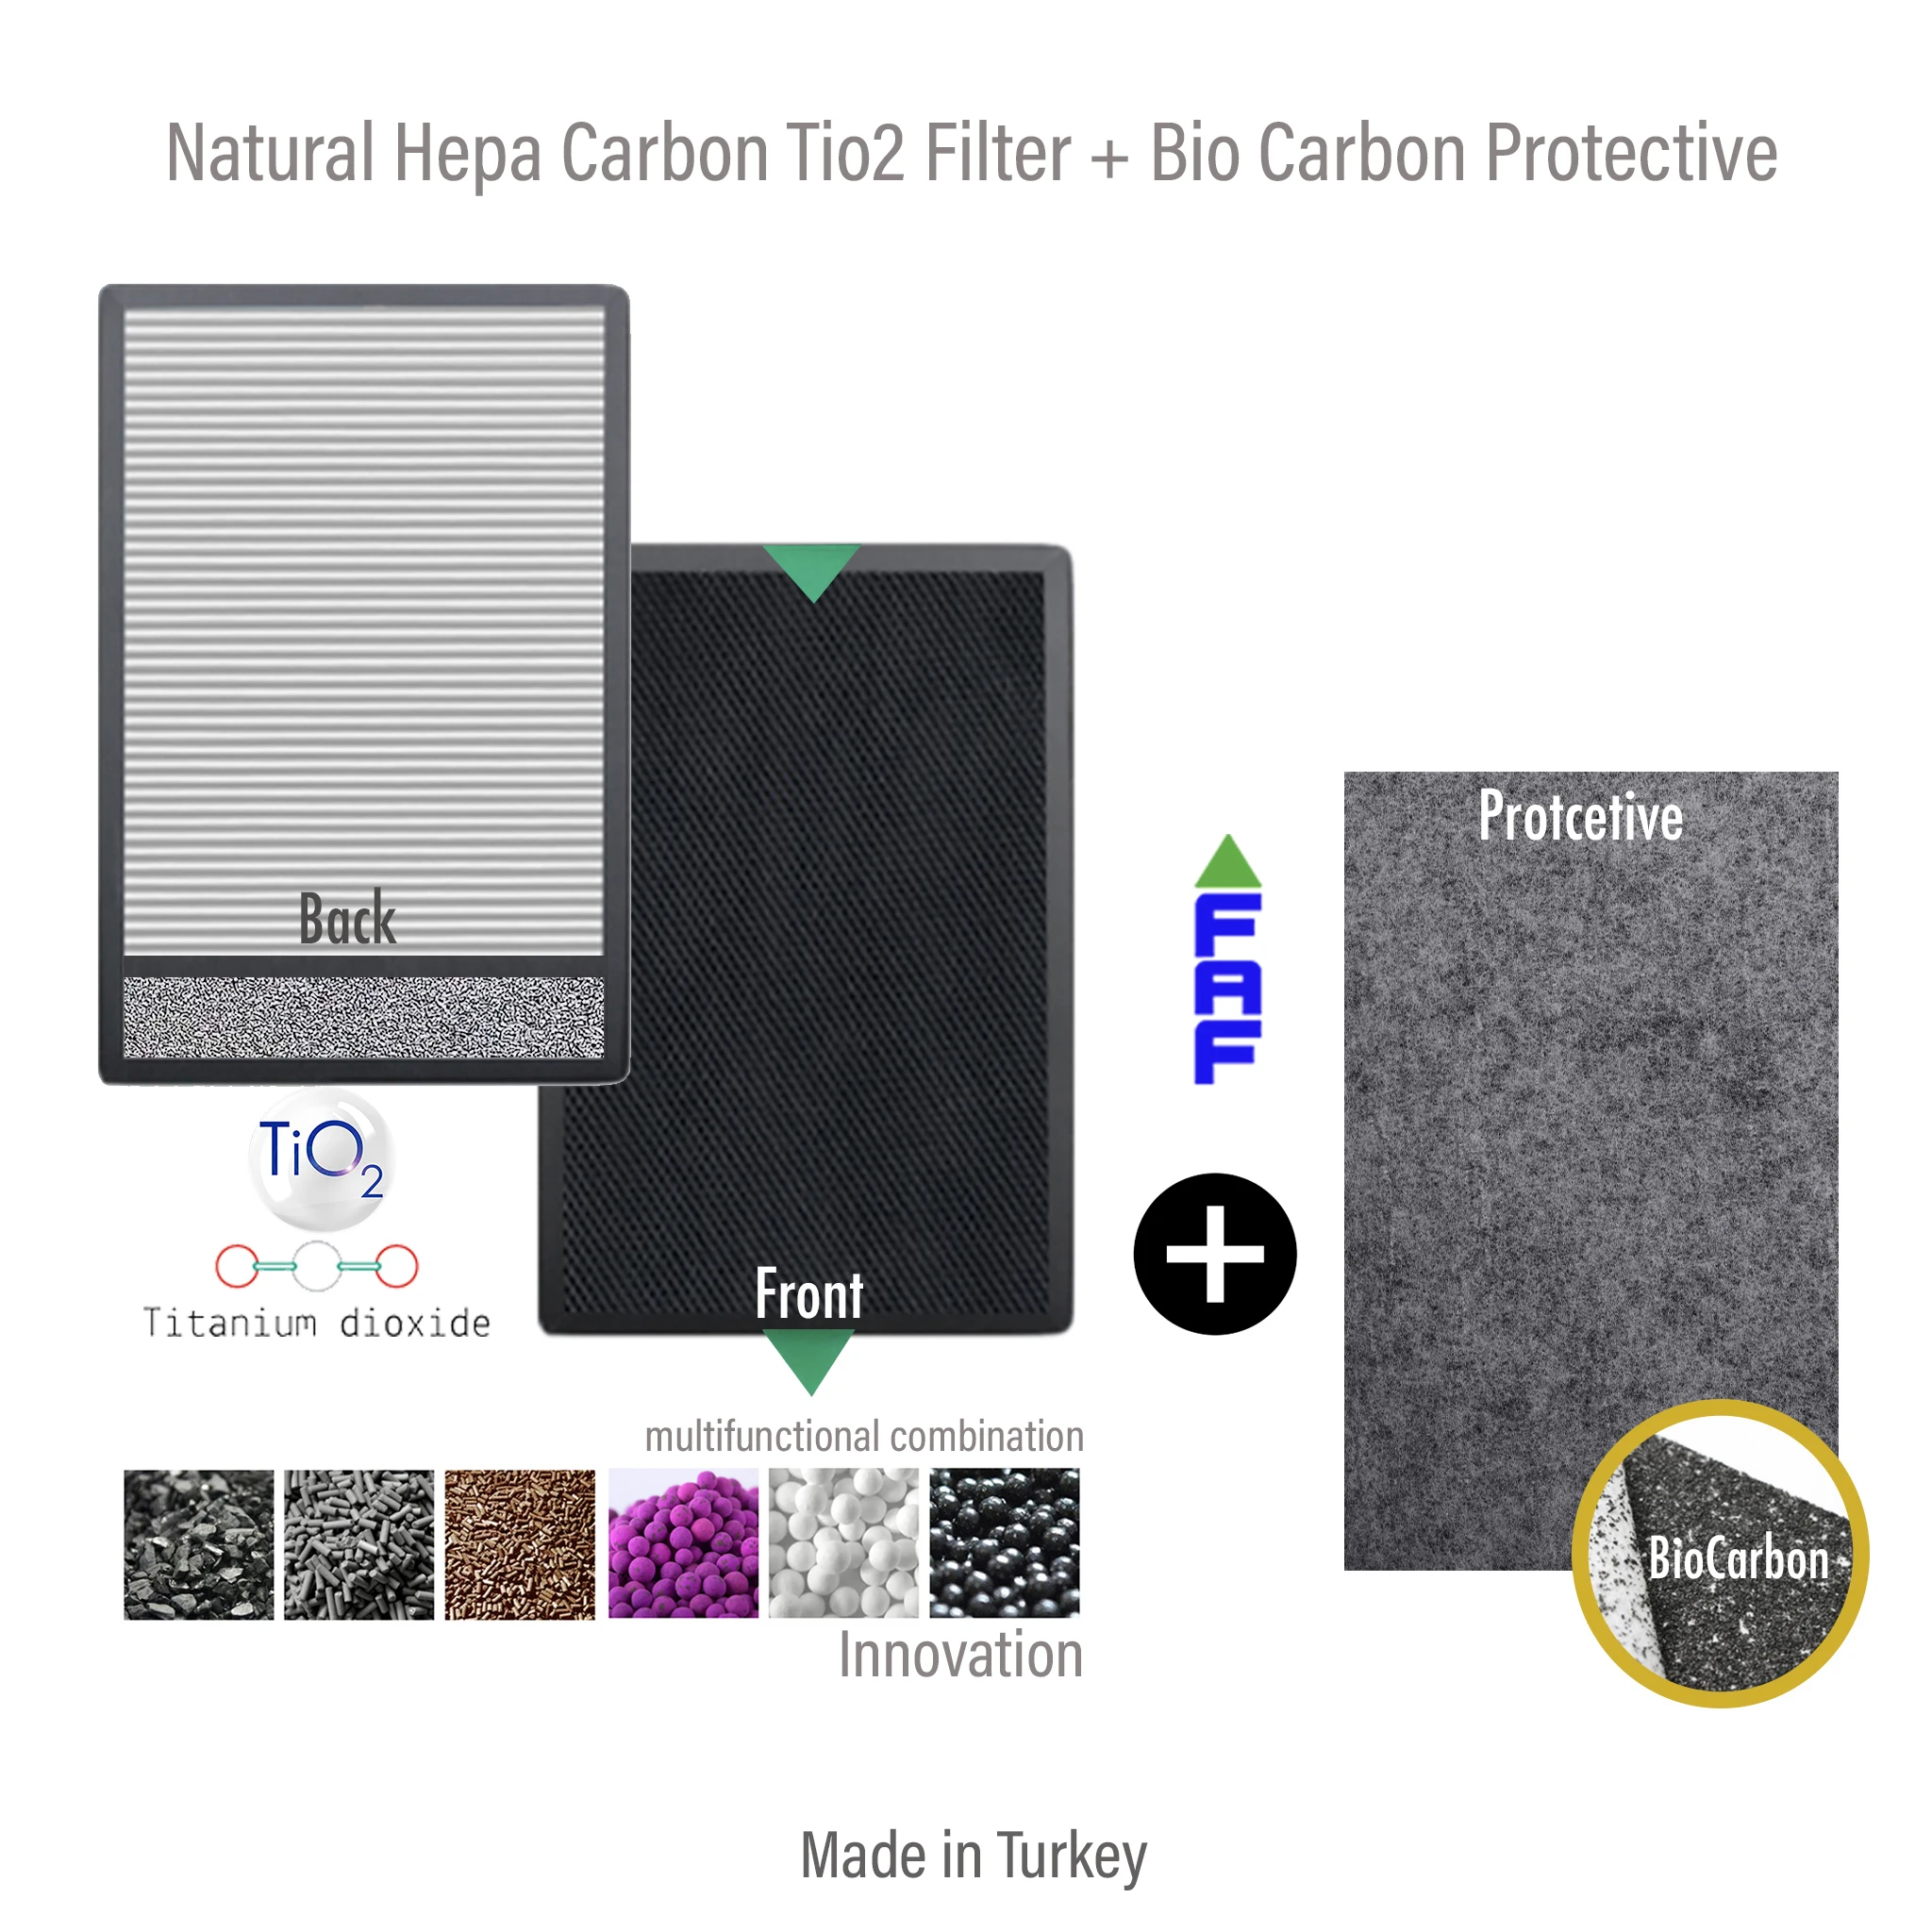 

NEWPORT ULTRA Air Purifier Filter Compatible TiO2 Hepa Carbon Natural Multifunctional + Protective